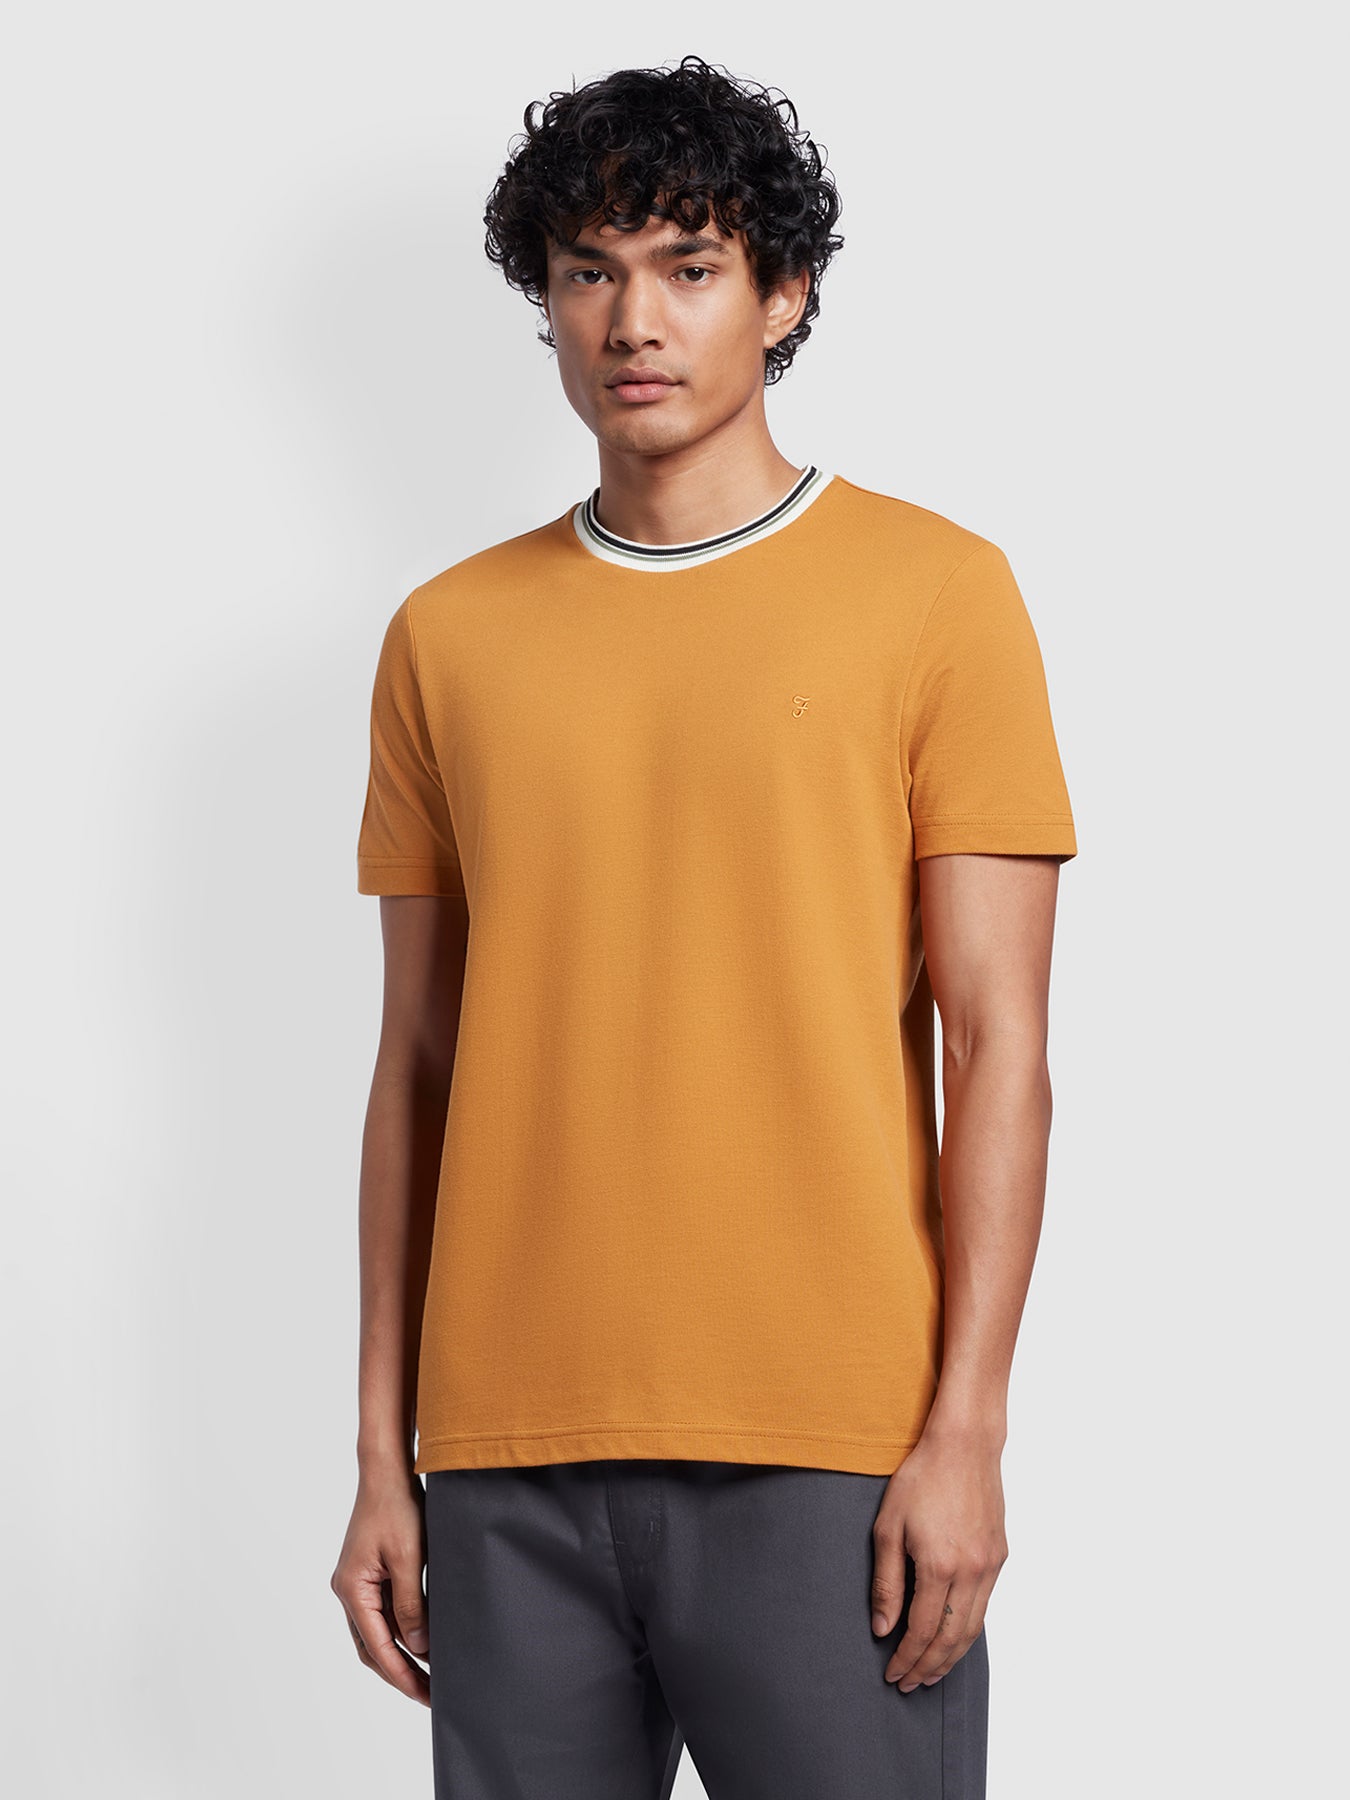 View Meadows Slim Fit Short Sleeve Tipped TShirt In Gold information